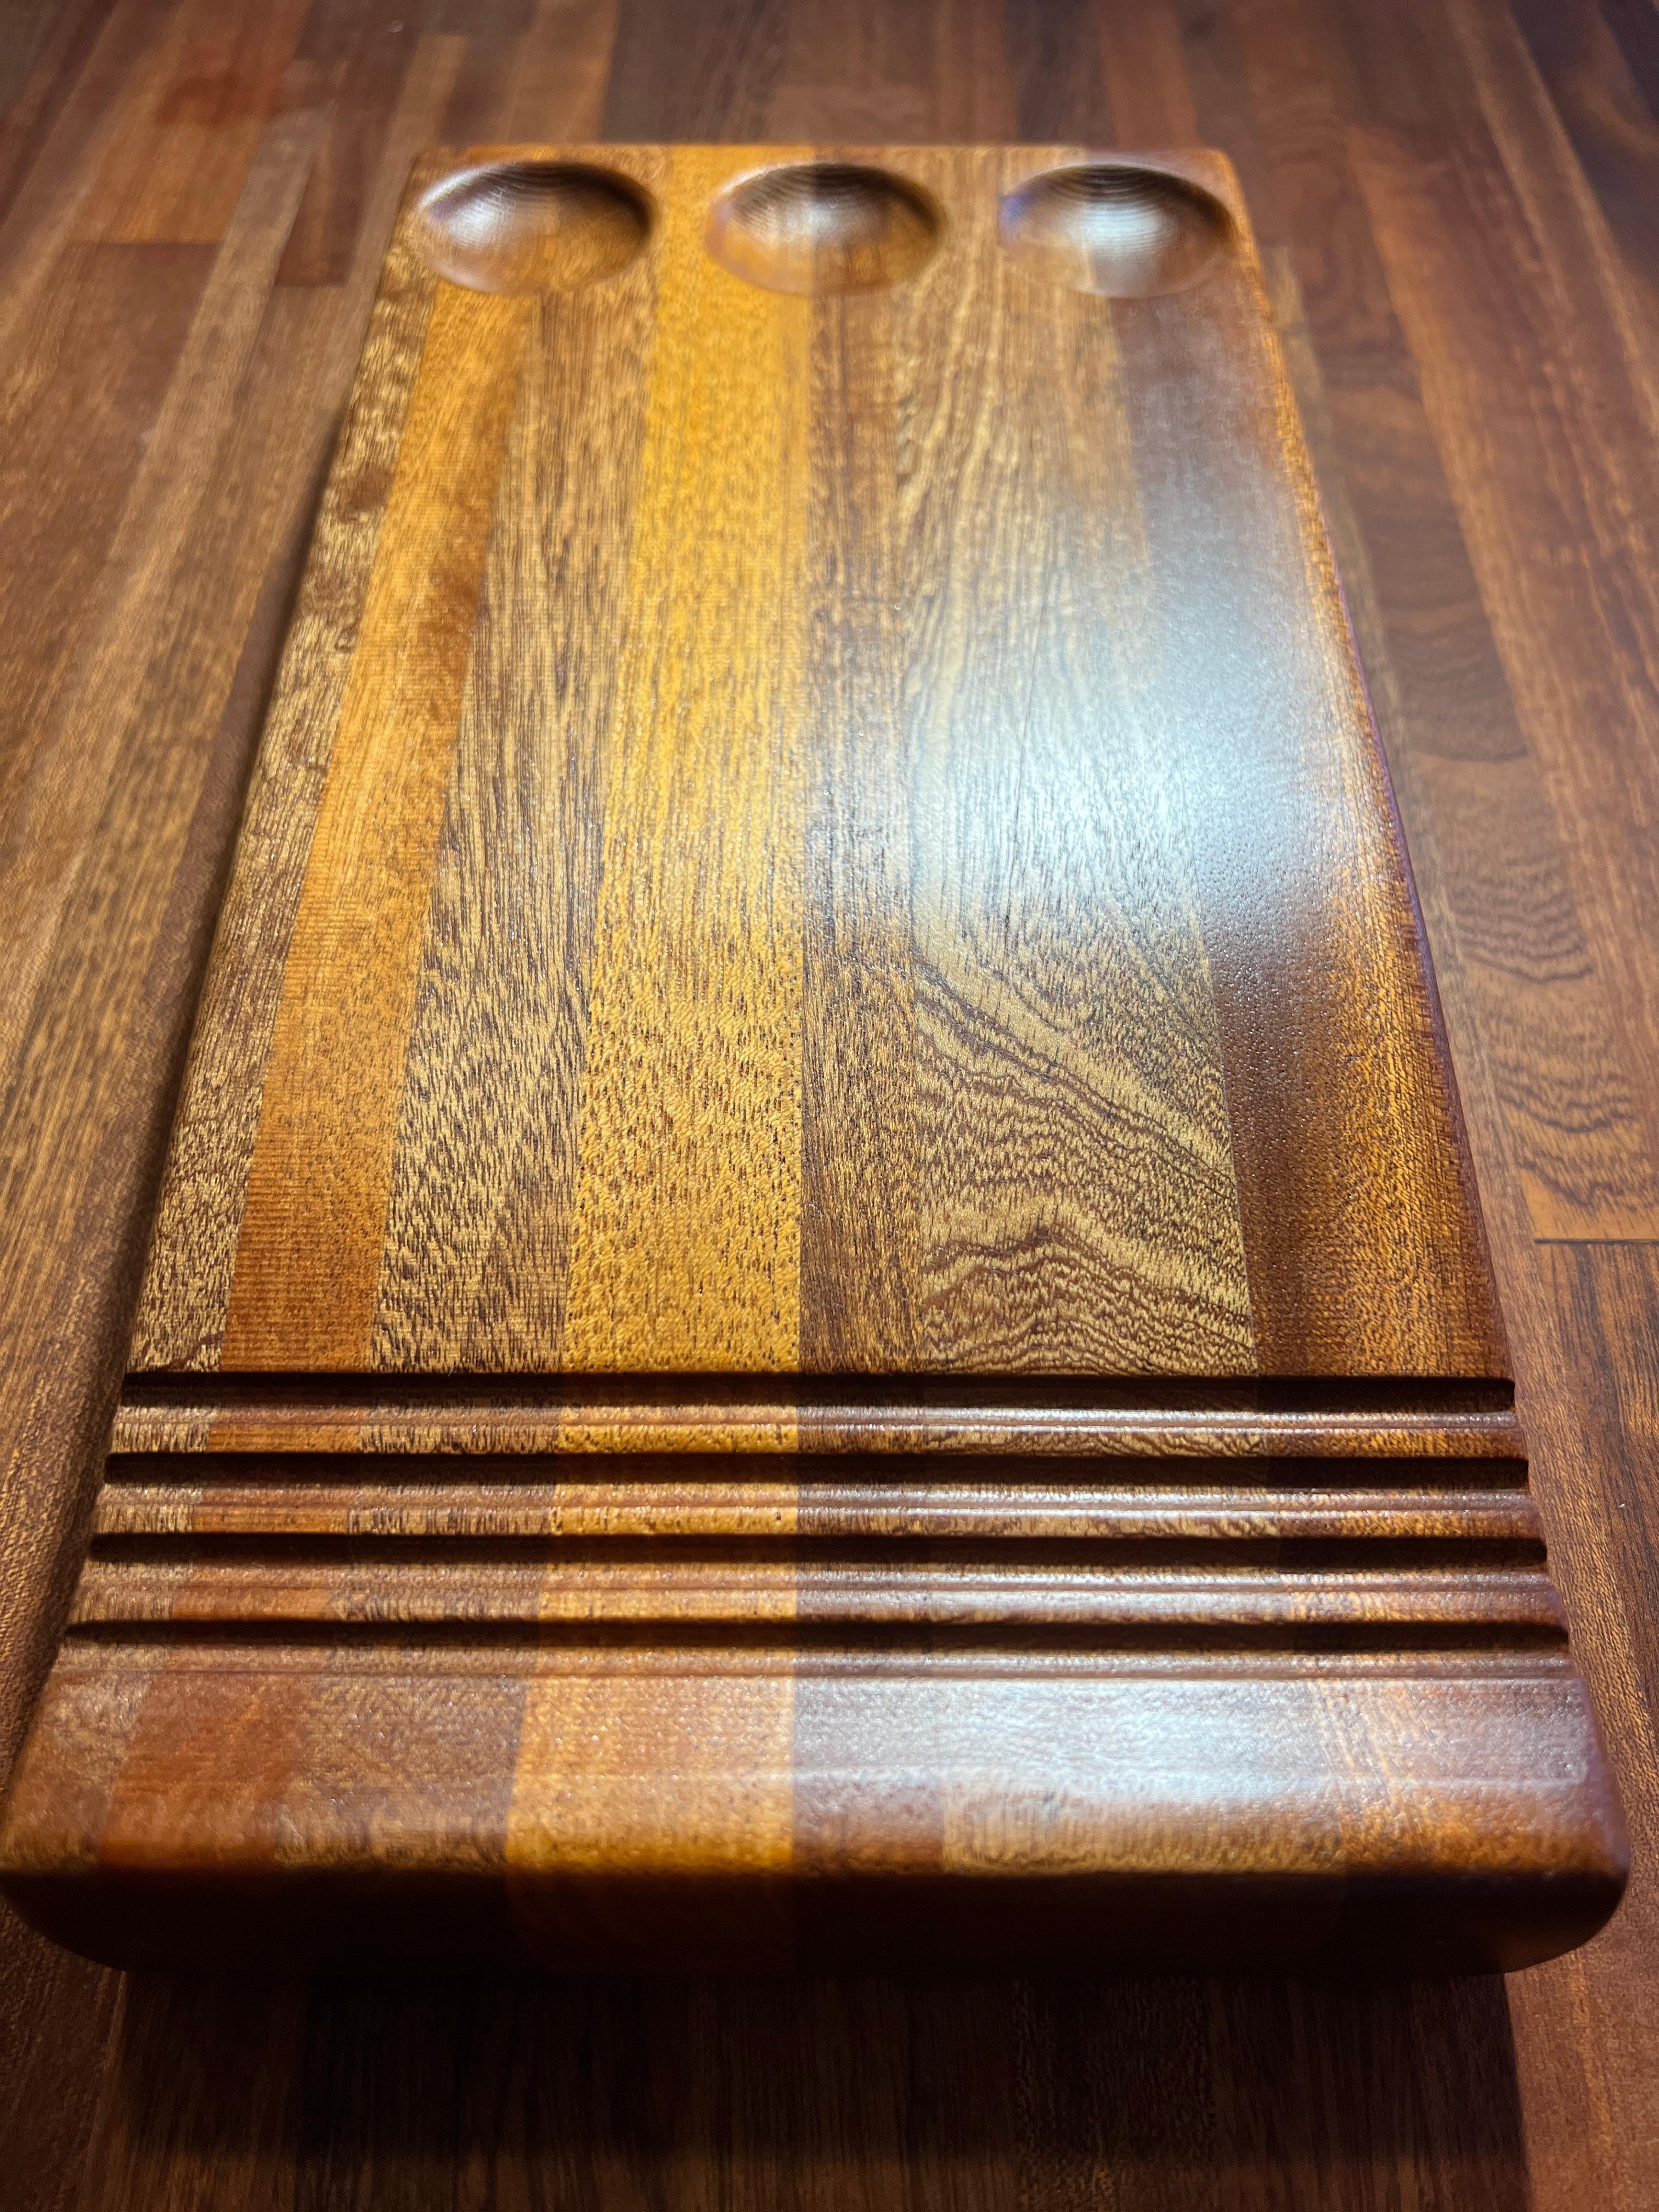 American Modern Stylish Sapele butcher block for preparing or serving in stock For Sale